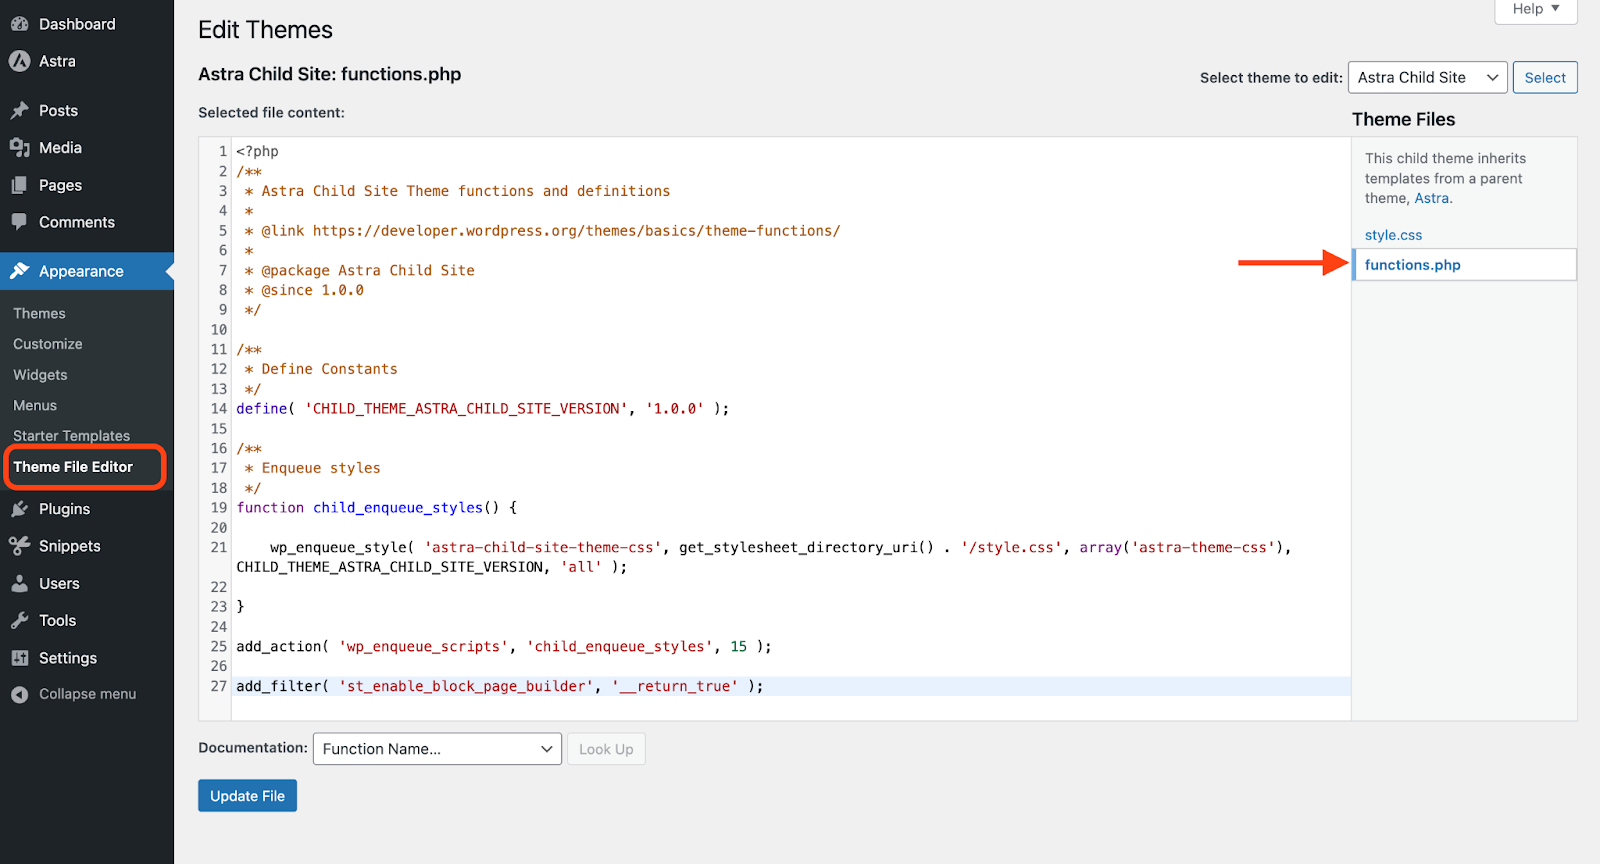 Navigate to Appearance > Theme Editor > functions.php